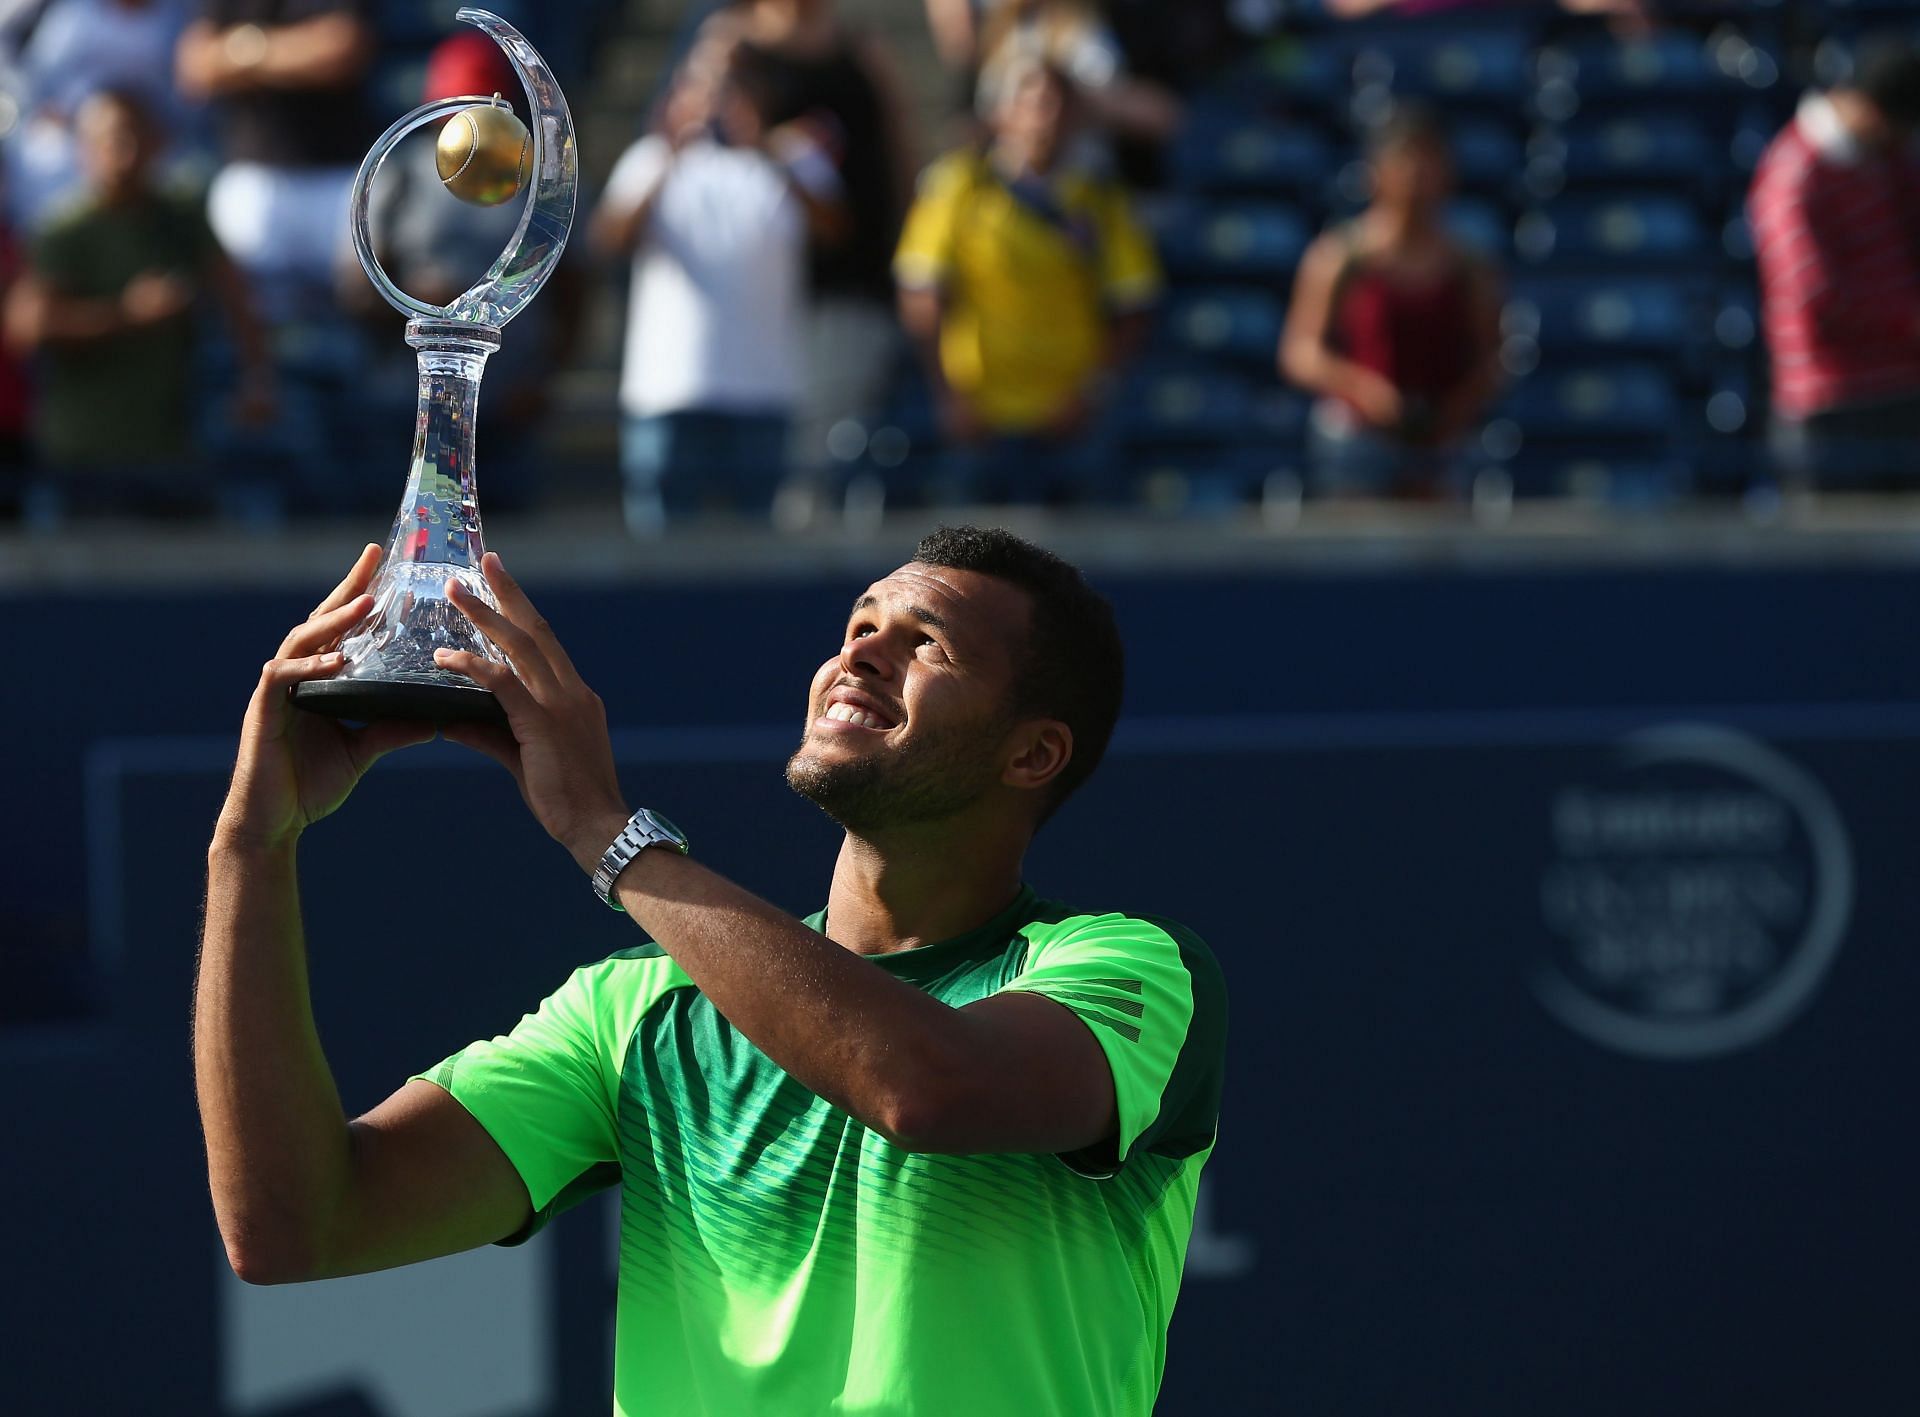 Jo-Wilfried Tsonga will retire from tennis after the French Open